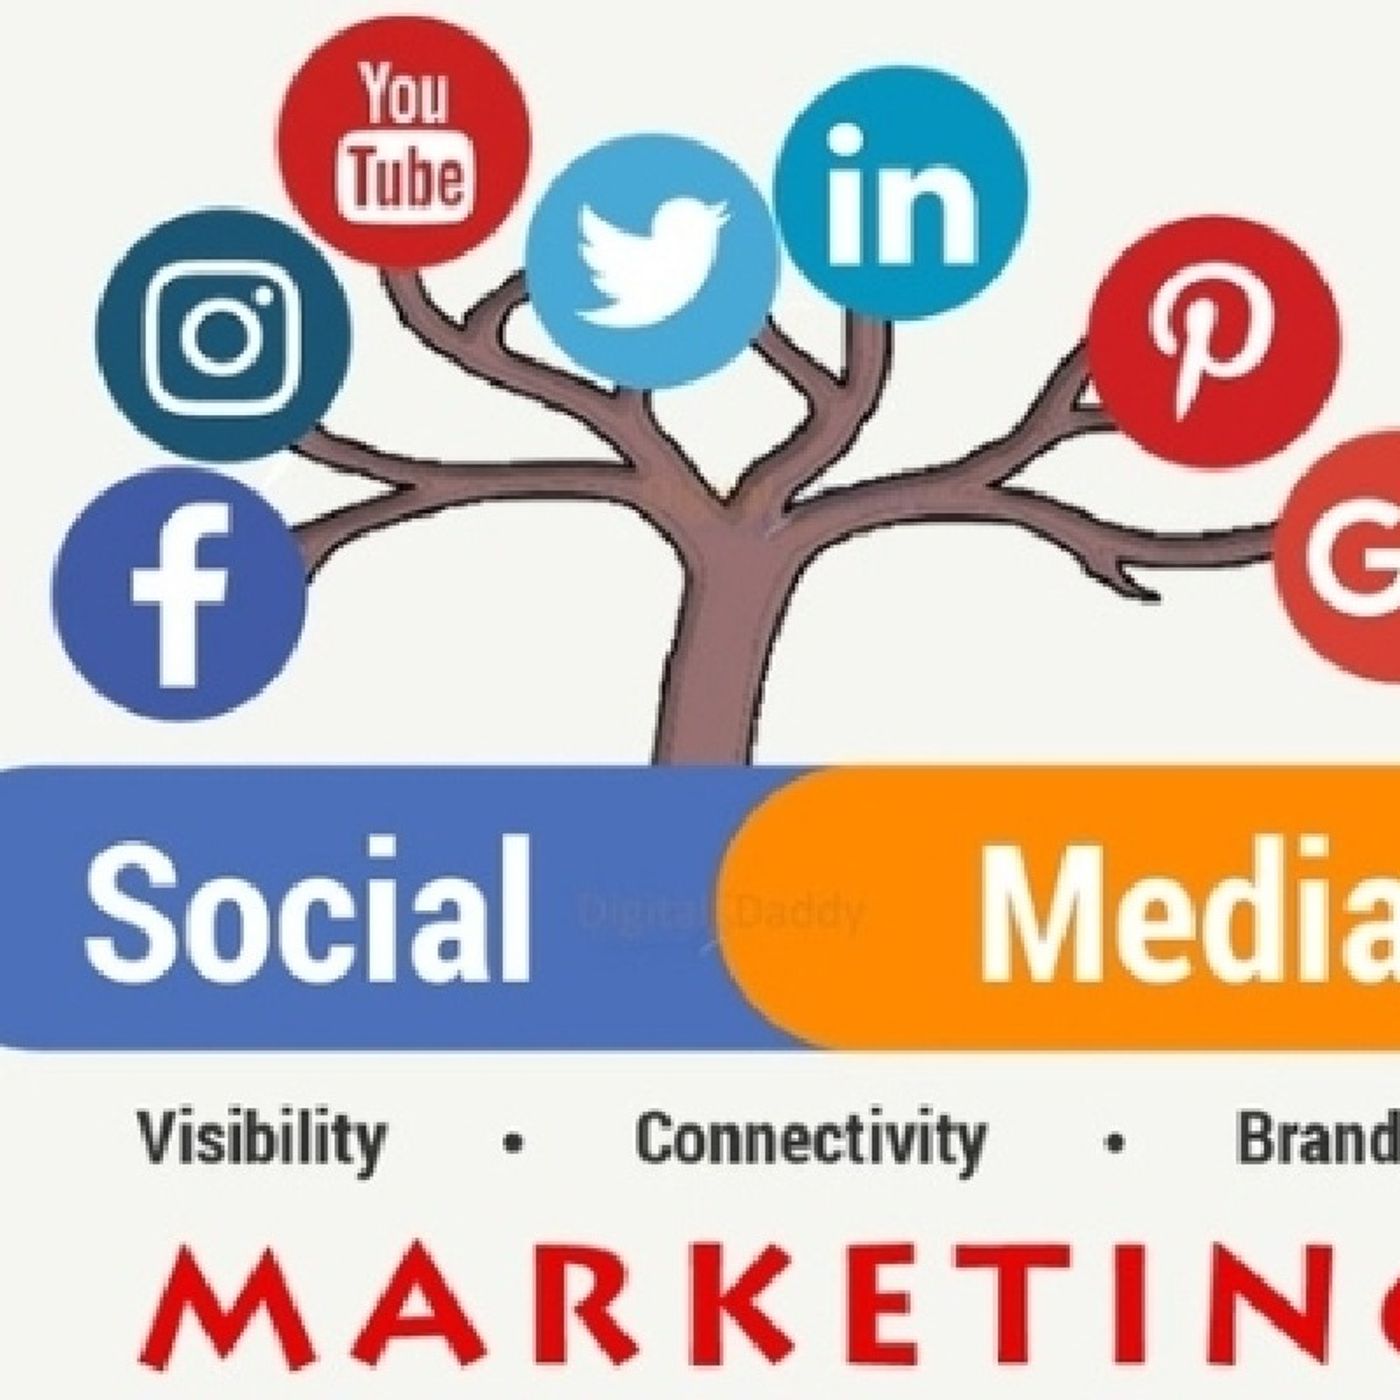 I Bet - You don't know the Full Potential of Social Media Marketing But I have Explained it Here!